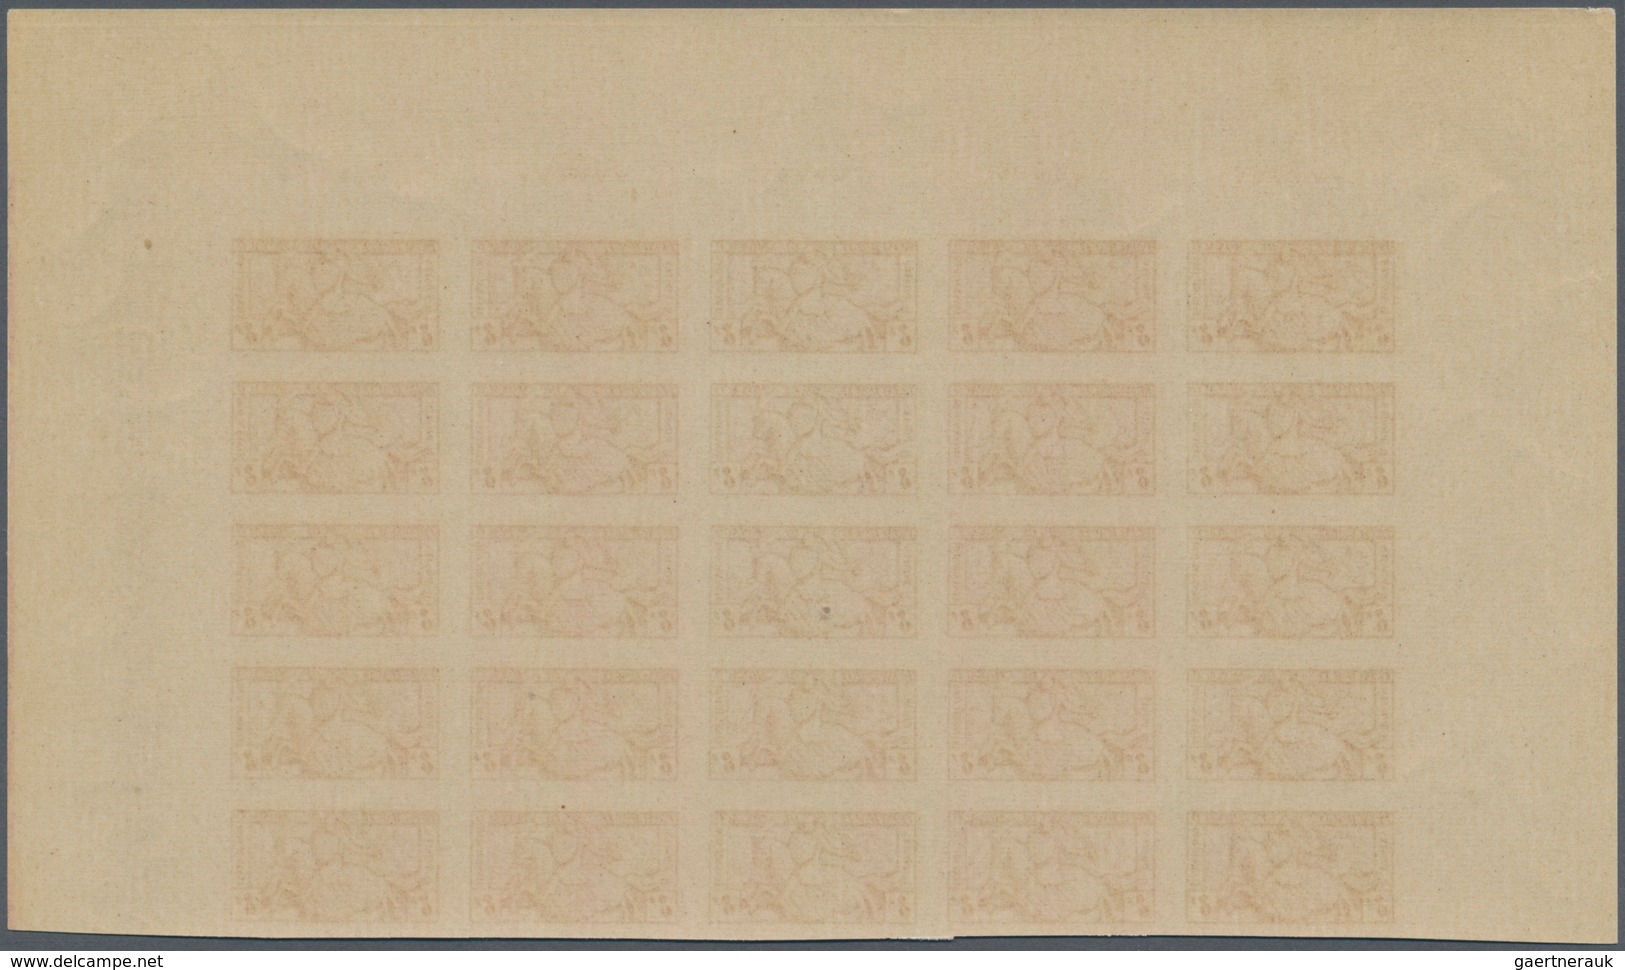 Monaco: 1951, Visiting card stamps complete set of five in IMPERFORATE blocks of 25 from upper margi